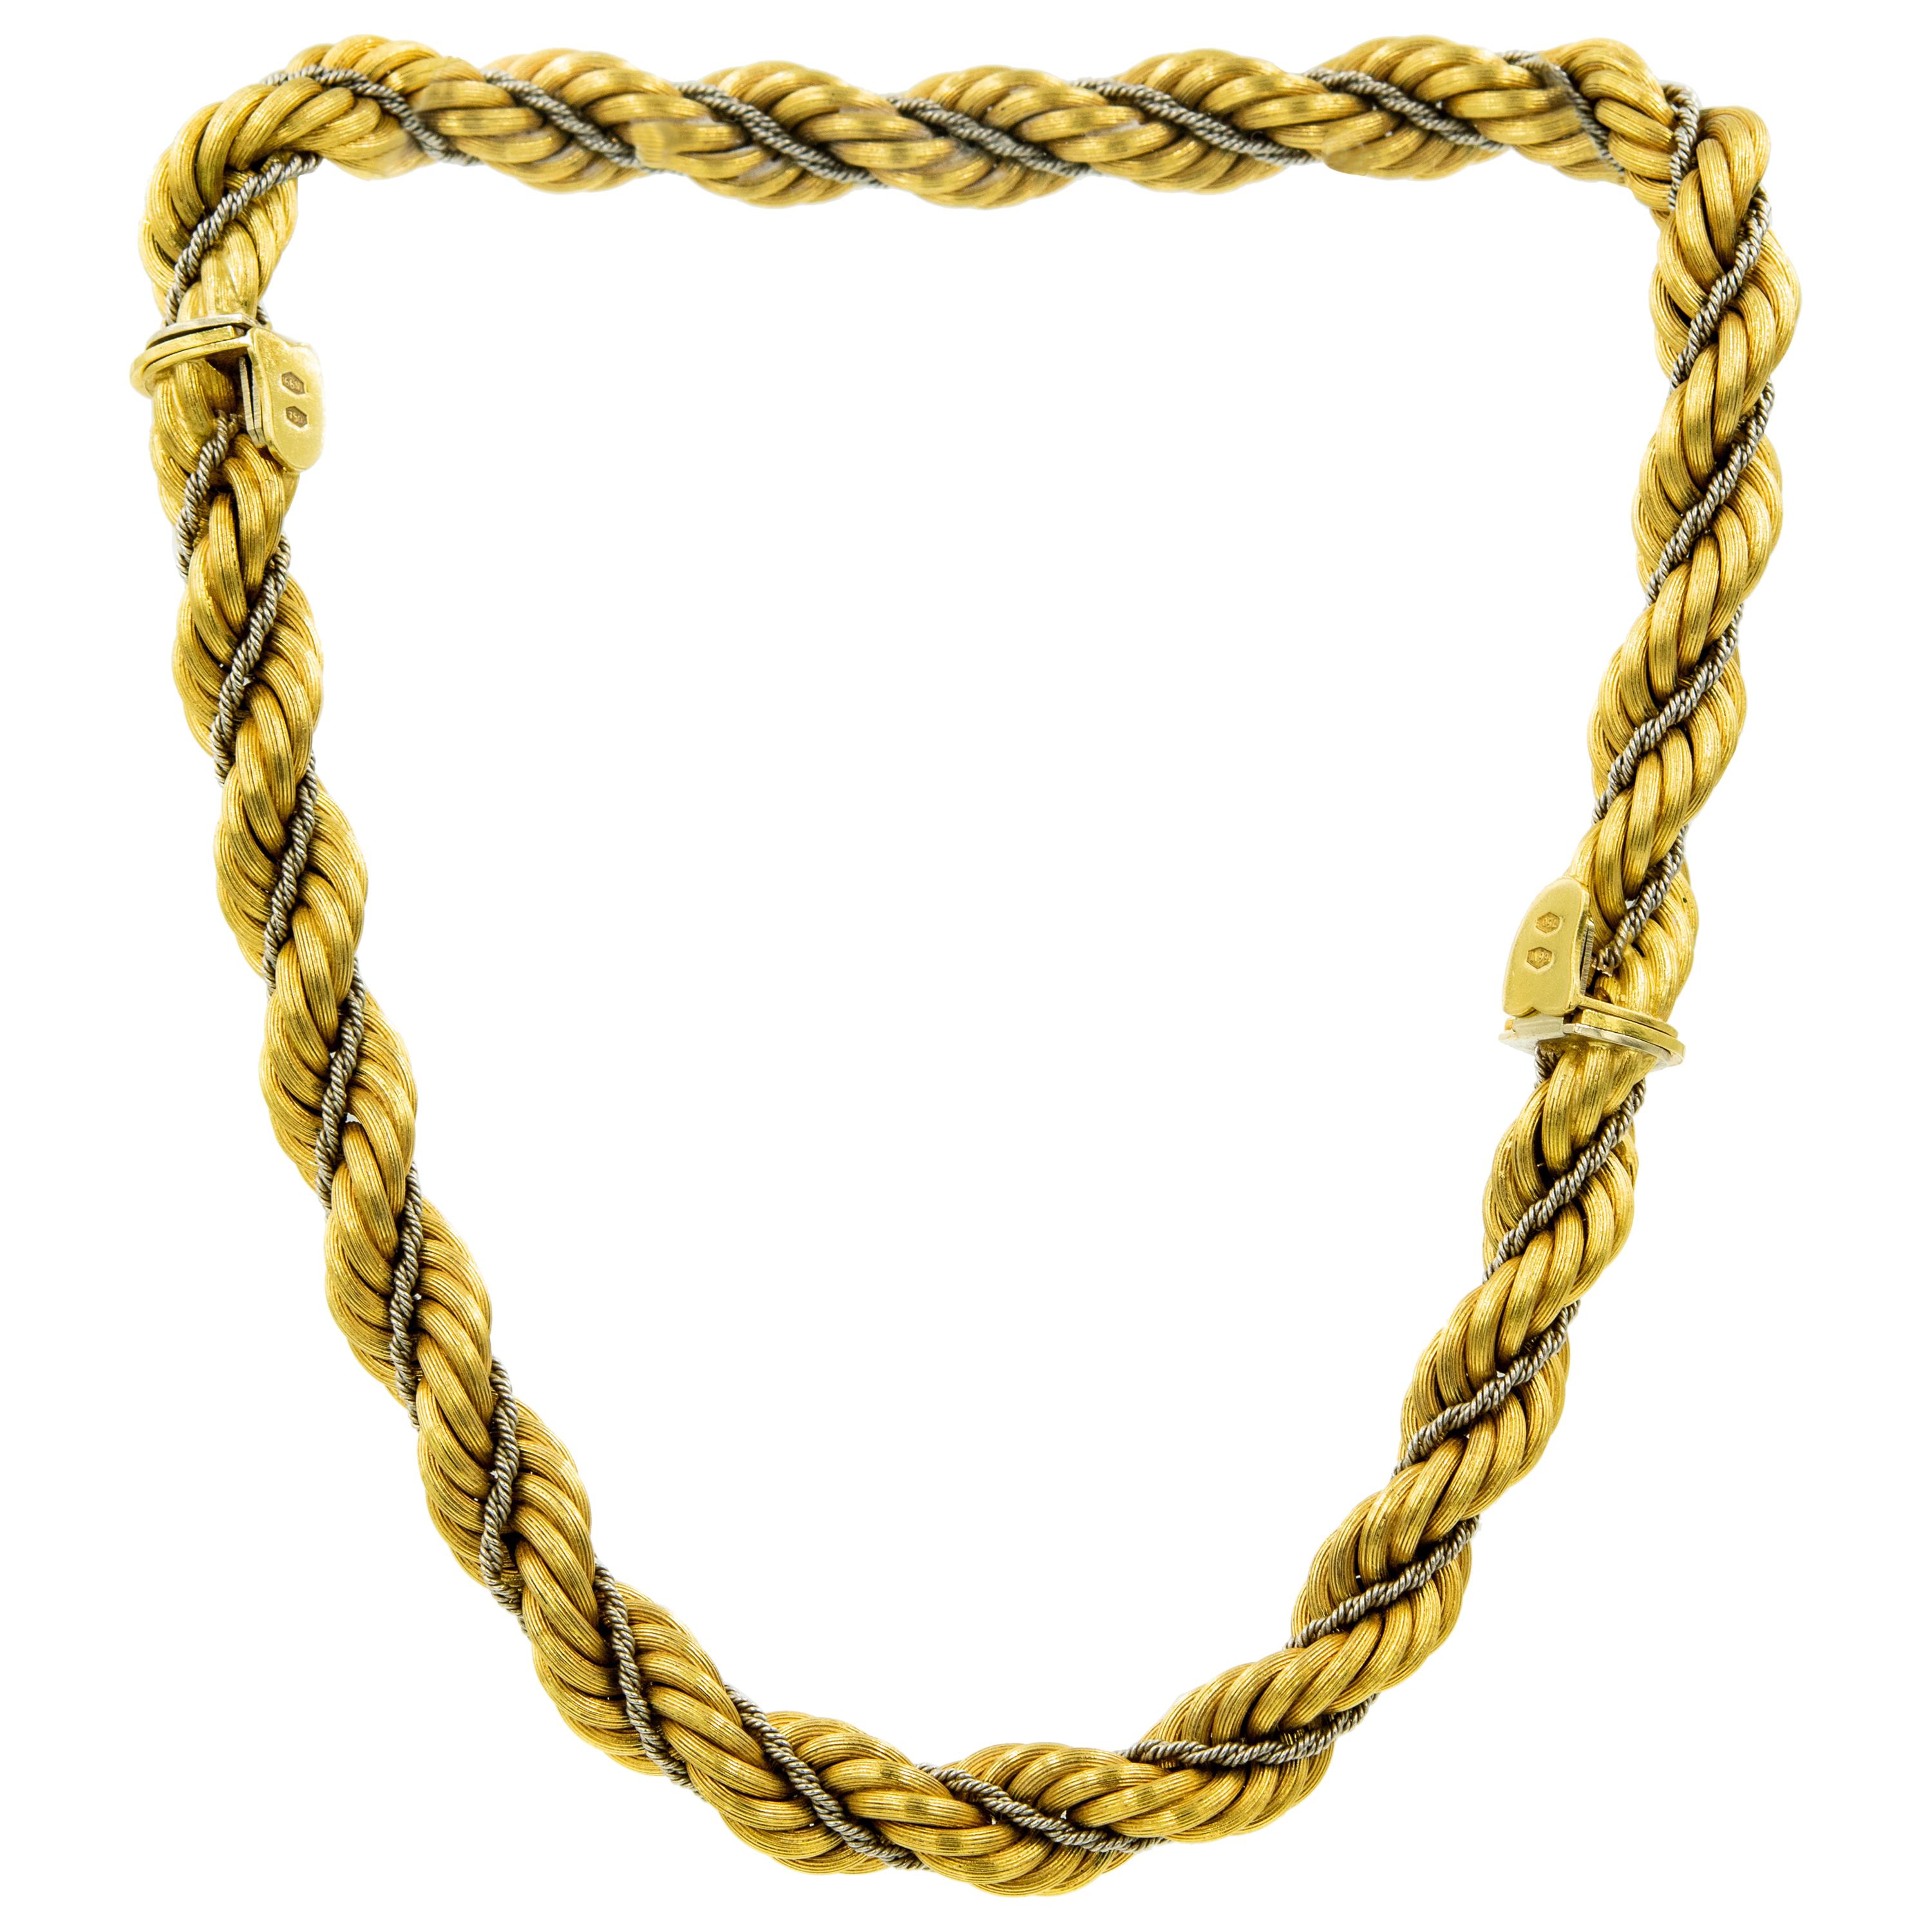 1970s Chic Italian set made by Vincenza jeweler Nicolis Cola. The set includes a 18k pair of bracelets featuring a wider (10.75mm) twisted yellow gold rope chain intertwined with a thinner white gold rope chain. They can be worn as bracelets or as